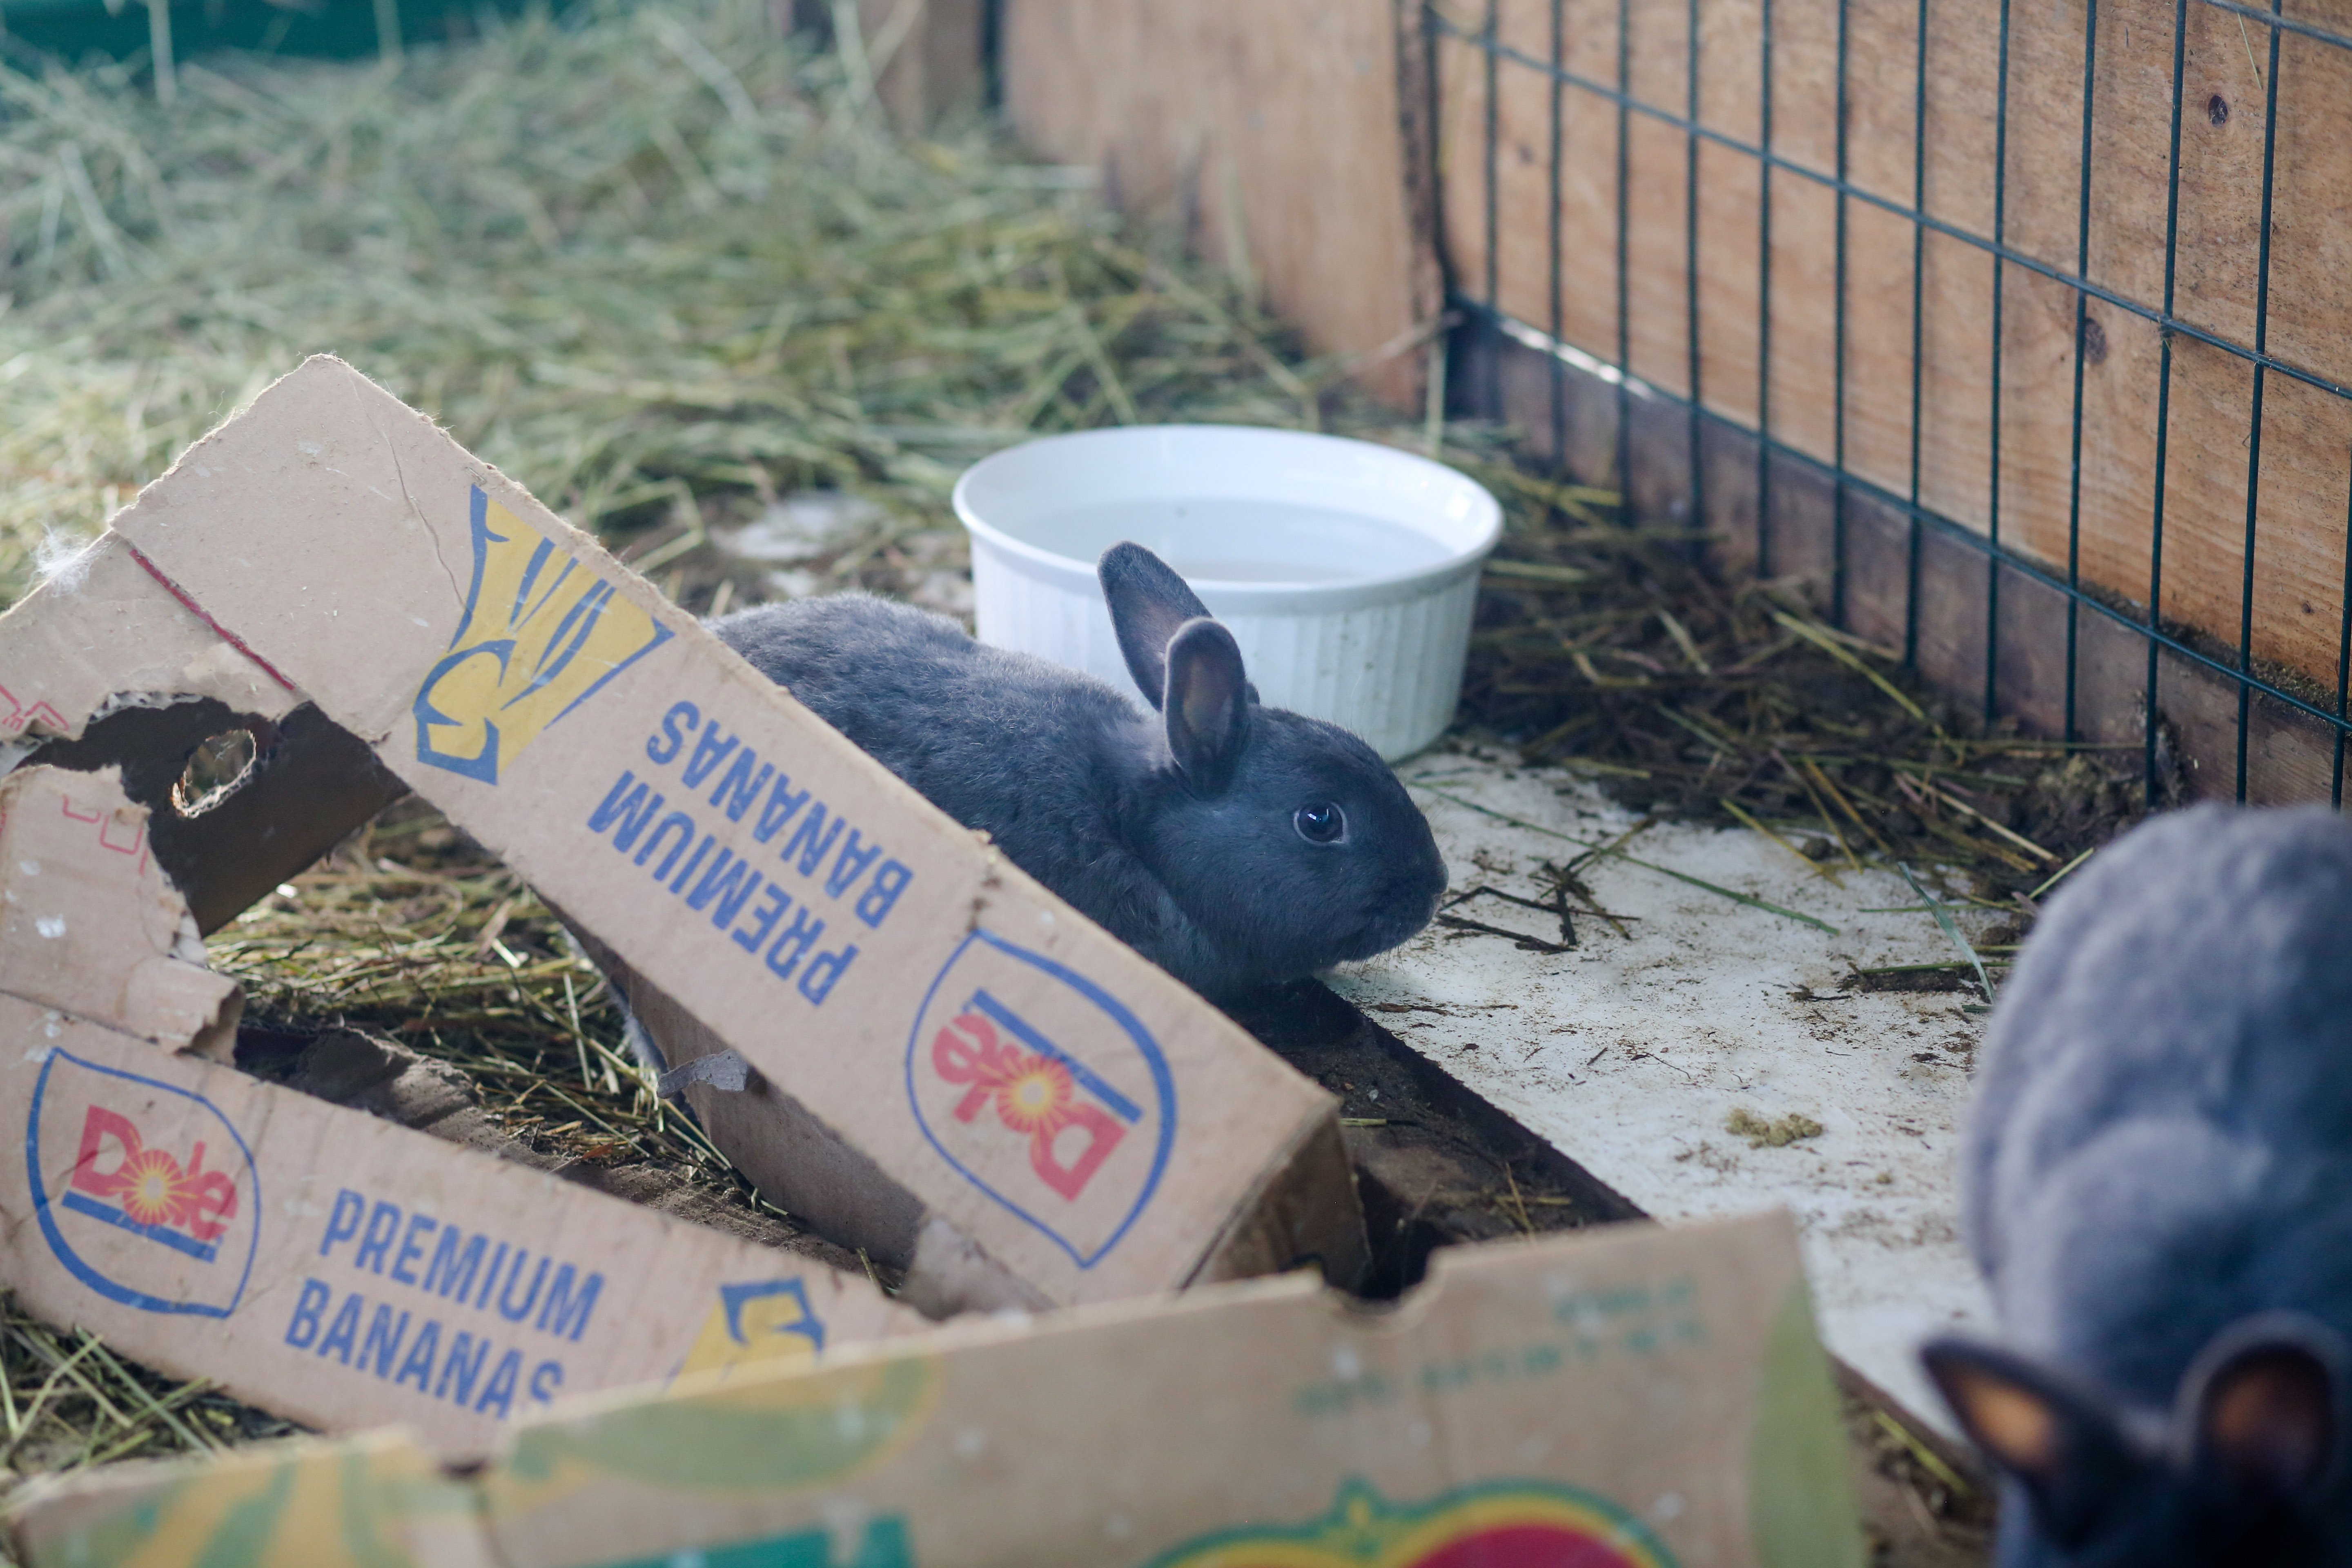 A small, dark grey rabbit emerges from a brown cardboard produce box previously used for bananas. To the right of the frame is another rabbit of similar size and colour. The rabbits are surrounded by cardboard boxes and hay in an outdoor enclosure.